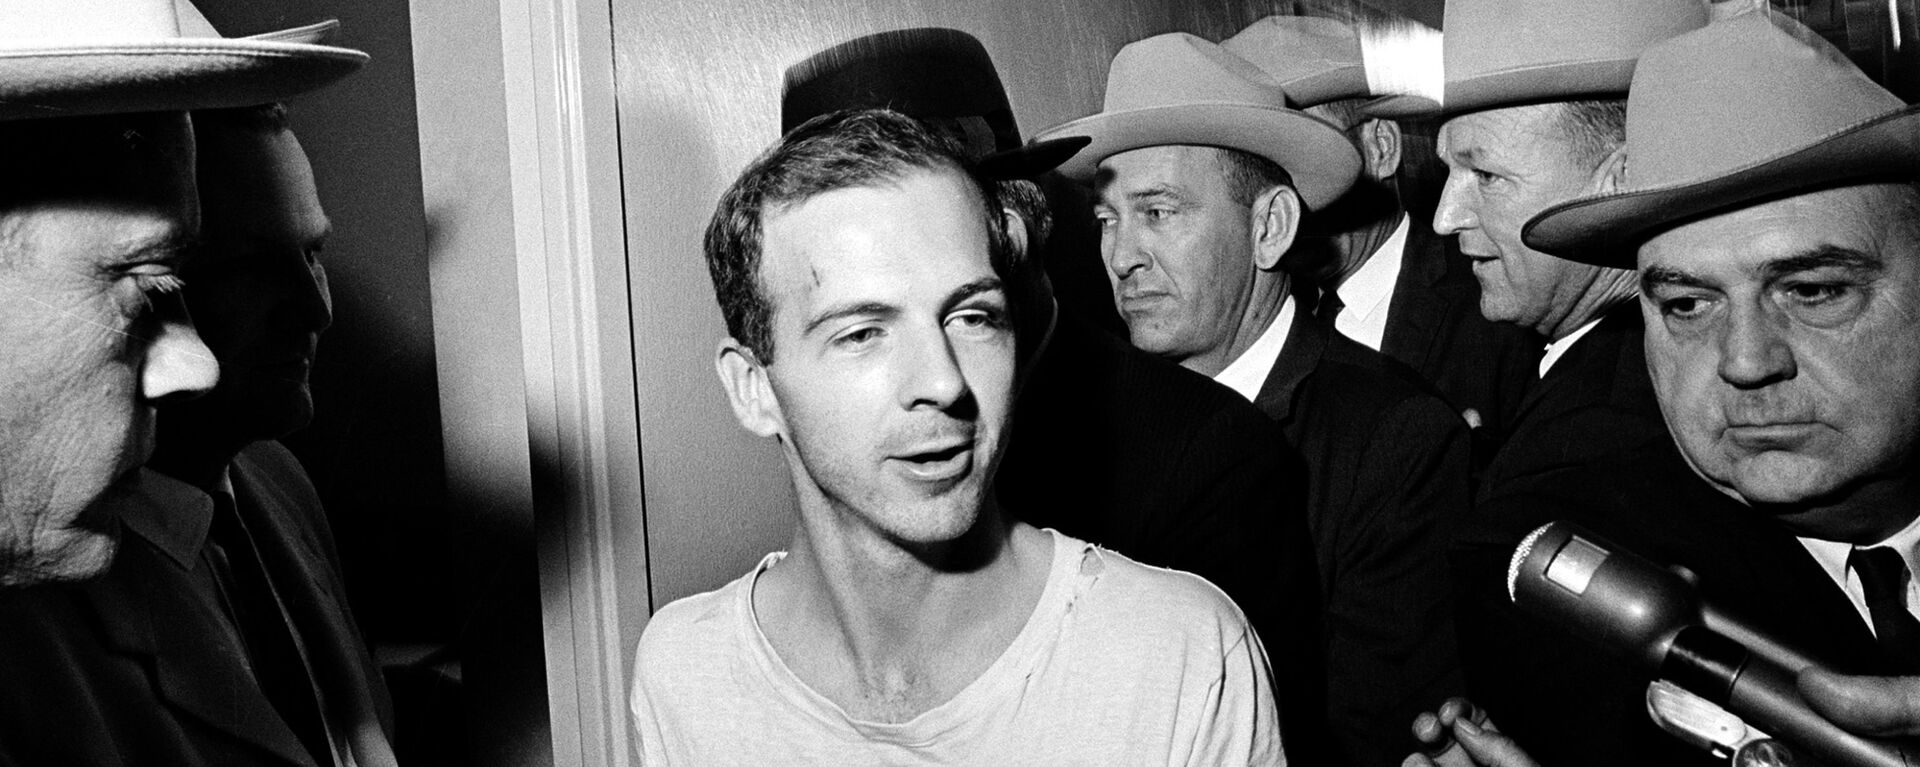 In this Nov. 23, 1963 file photo, surrounded by detectives, Lee Harvey Oswald talks to the press as he is led down a corridor of the Dallas police station for another round of questioning in connection with the assassination of U.S. President John F. Kennedy. Oswald, who denied any involvement in the shooting, was killed two days later, live on television, in the basement of the Dallas Police Headquarters, by local nightclub owner Jack Ruby.  - Sputnik International, 1920, 23.02.2021